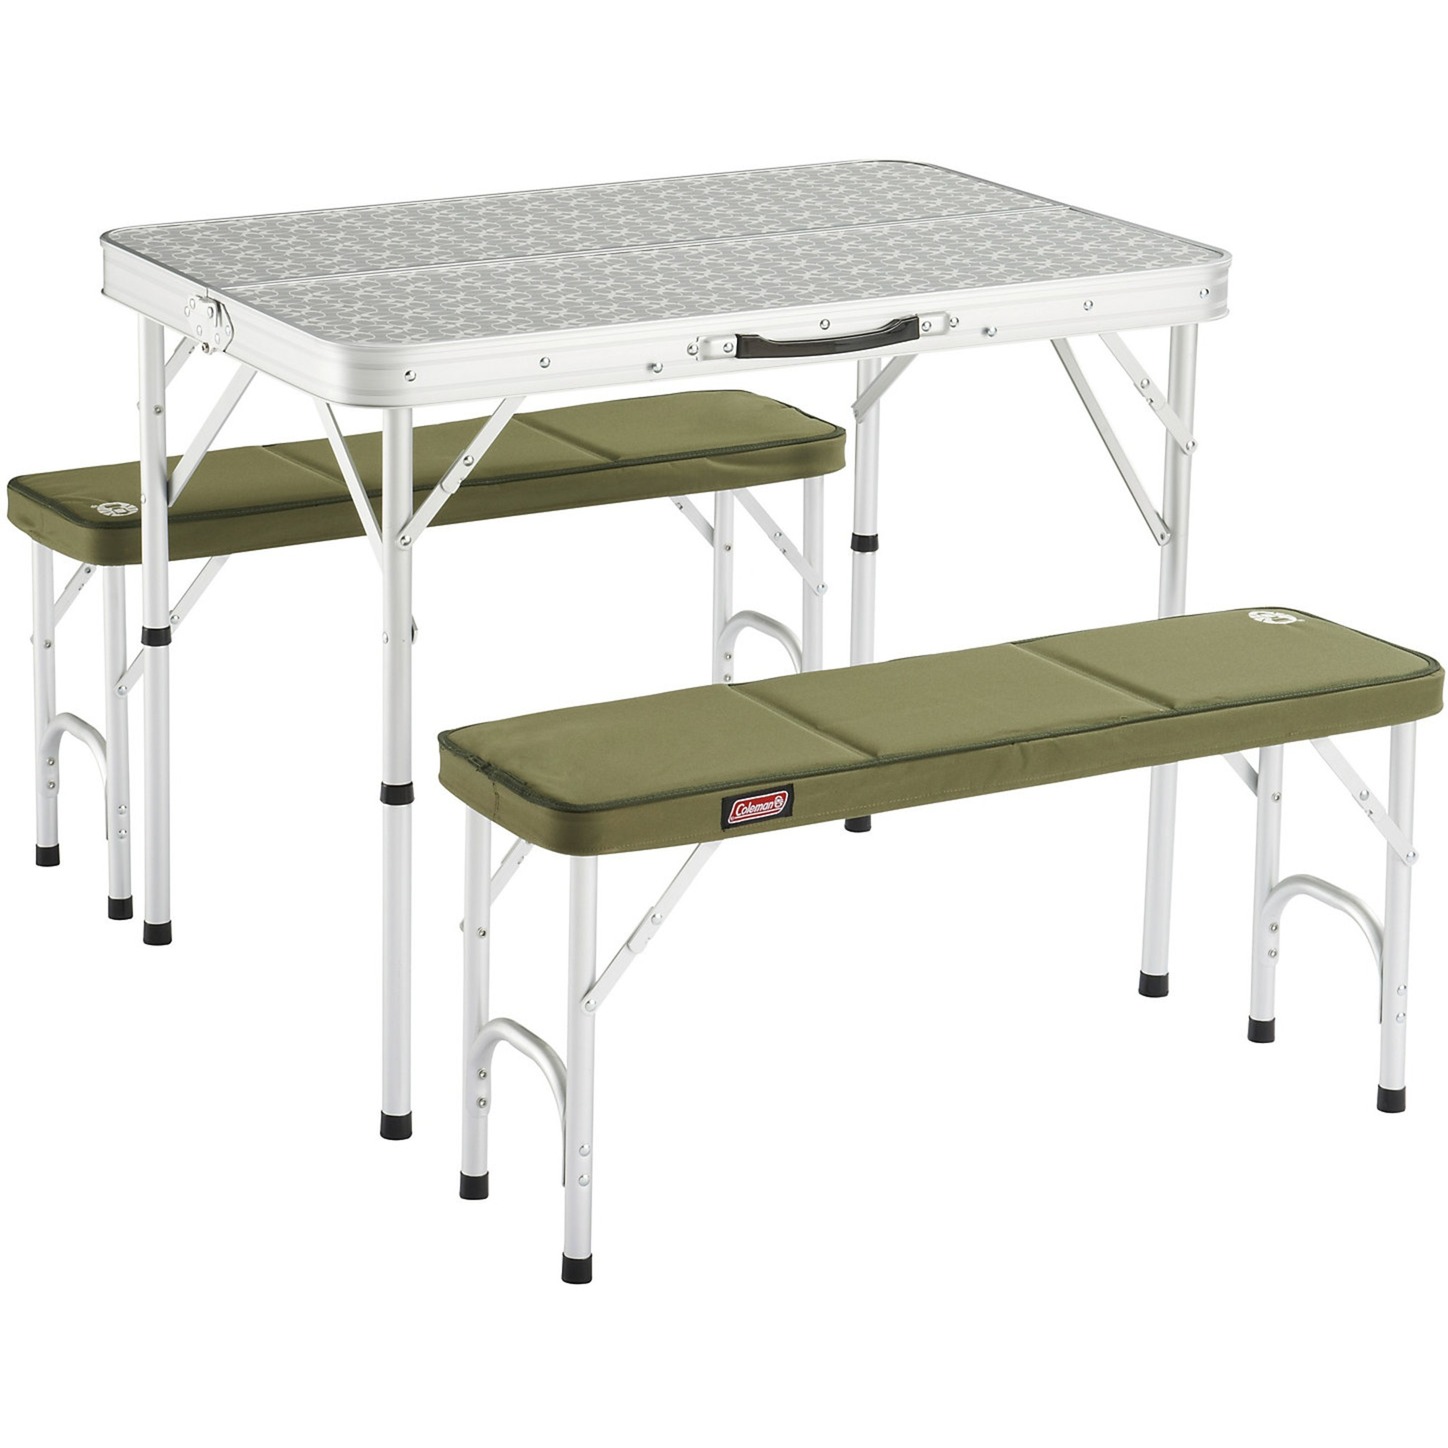 Image of Alternate - Pack-Away Table for 4 205584, Camping-Set online einkaufen bei Alternate